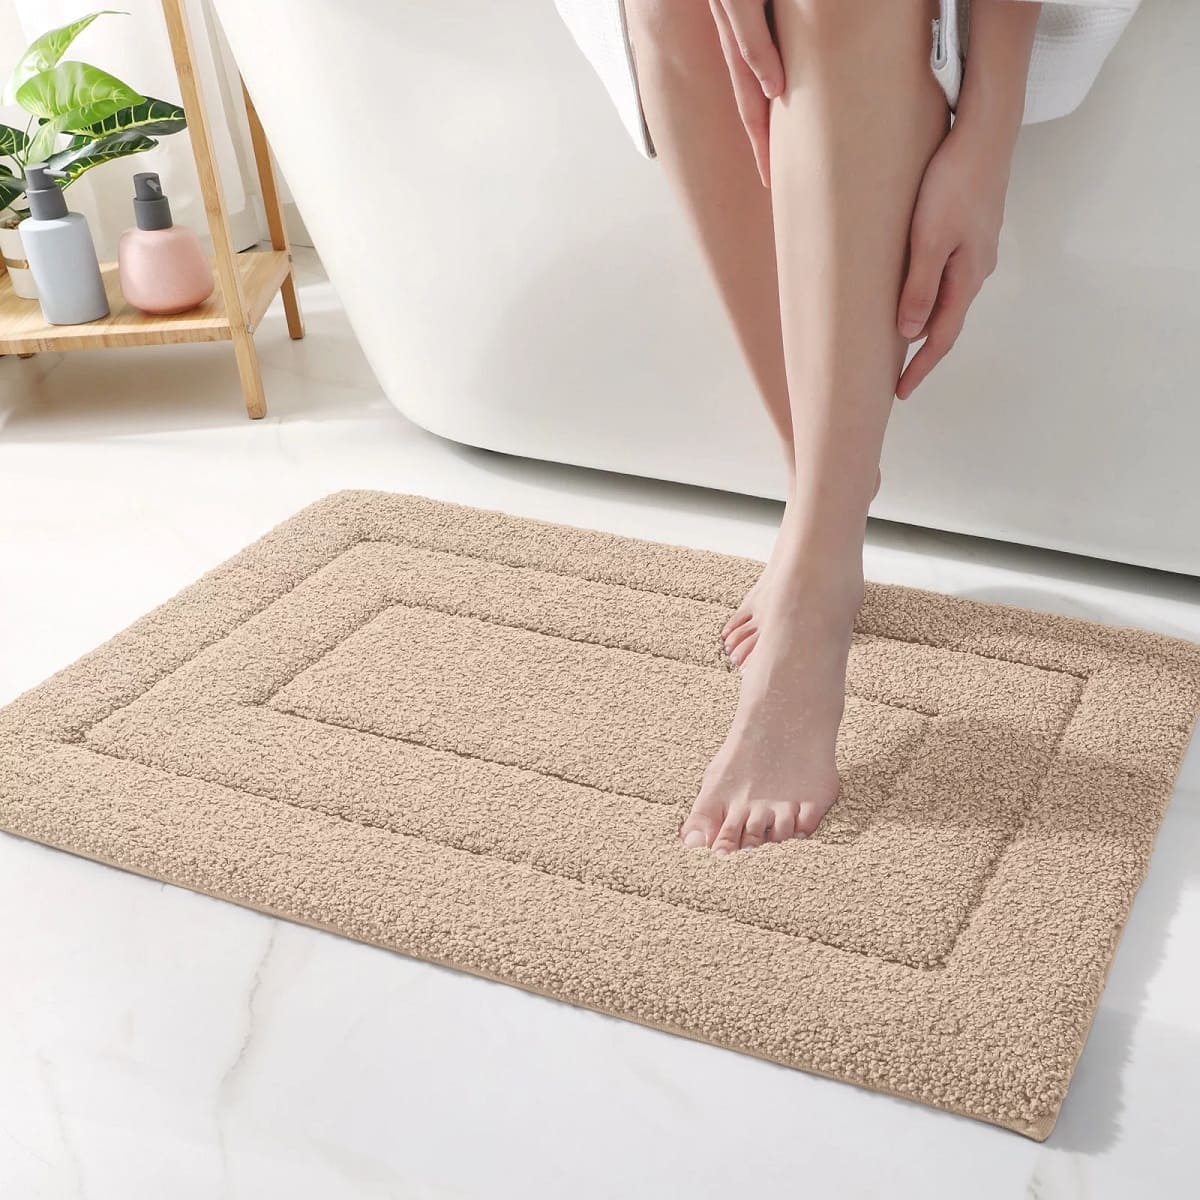 How To Keep A Bath Mat From Smelling